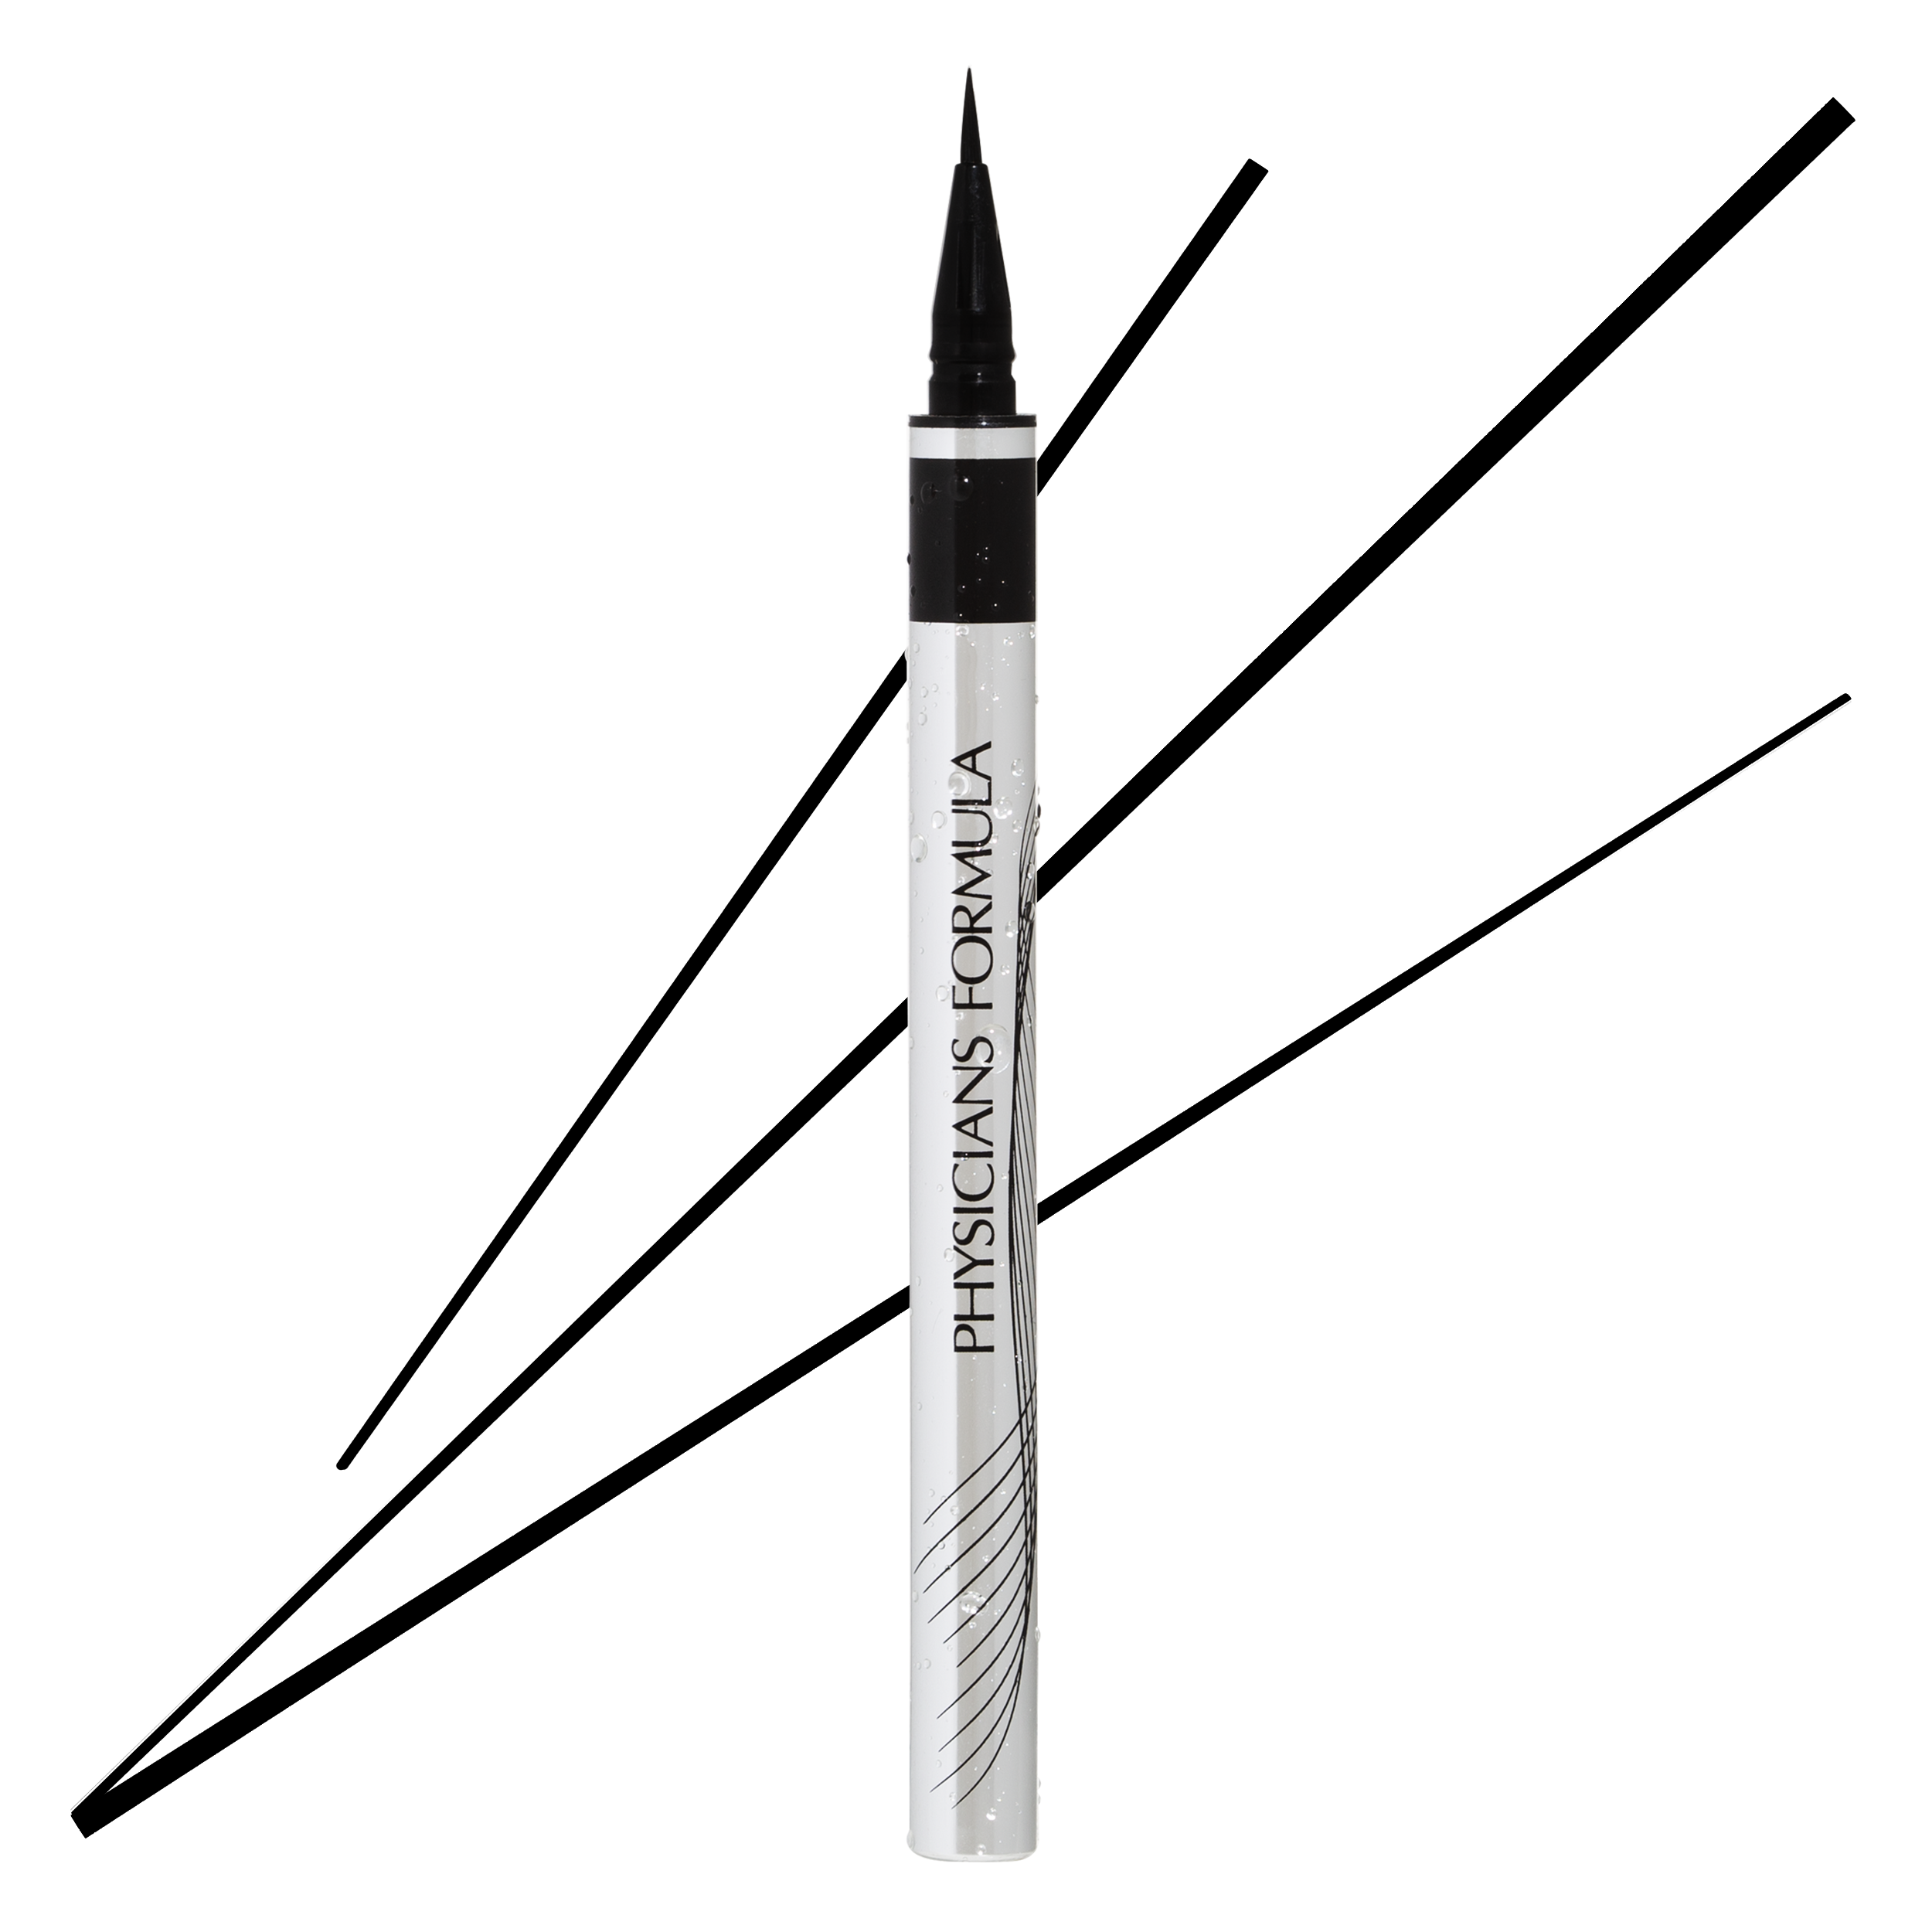 Check out our website to find the top Eye See Pipsticks available at an  unbeatable price